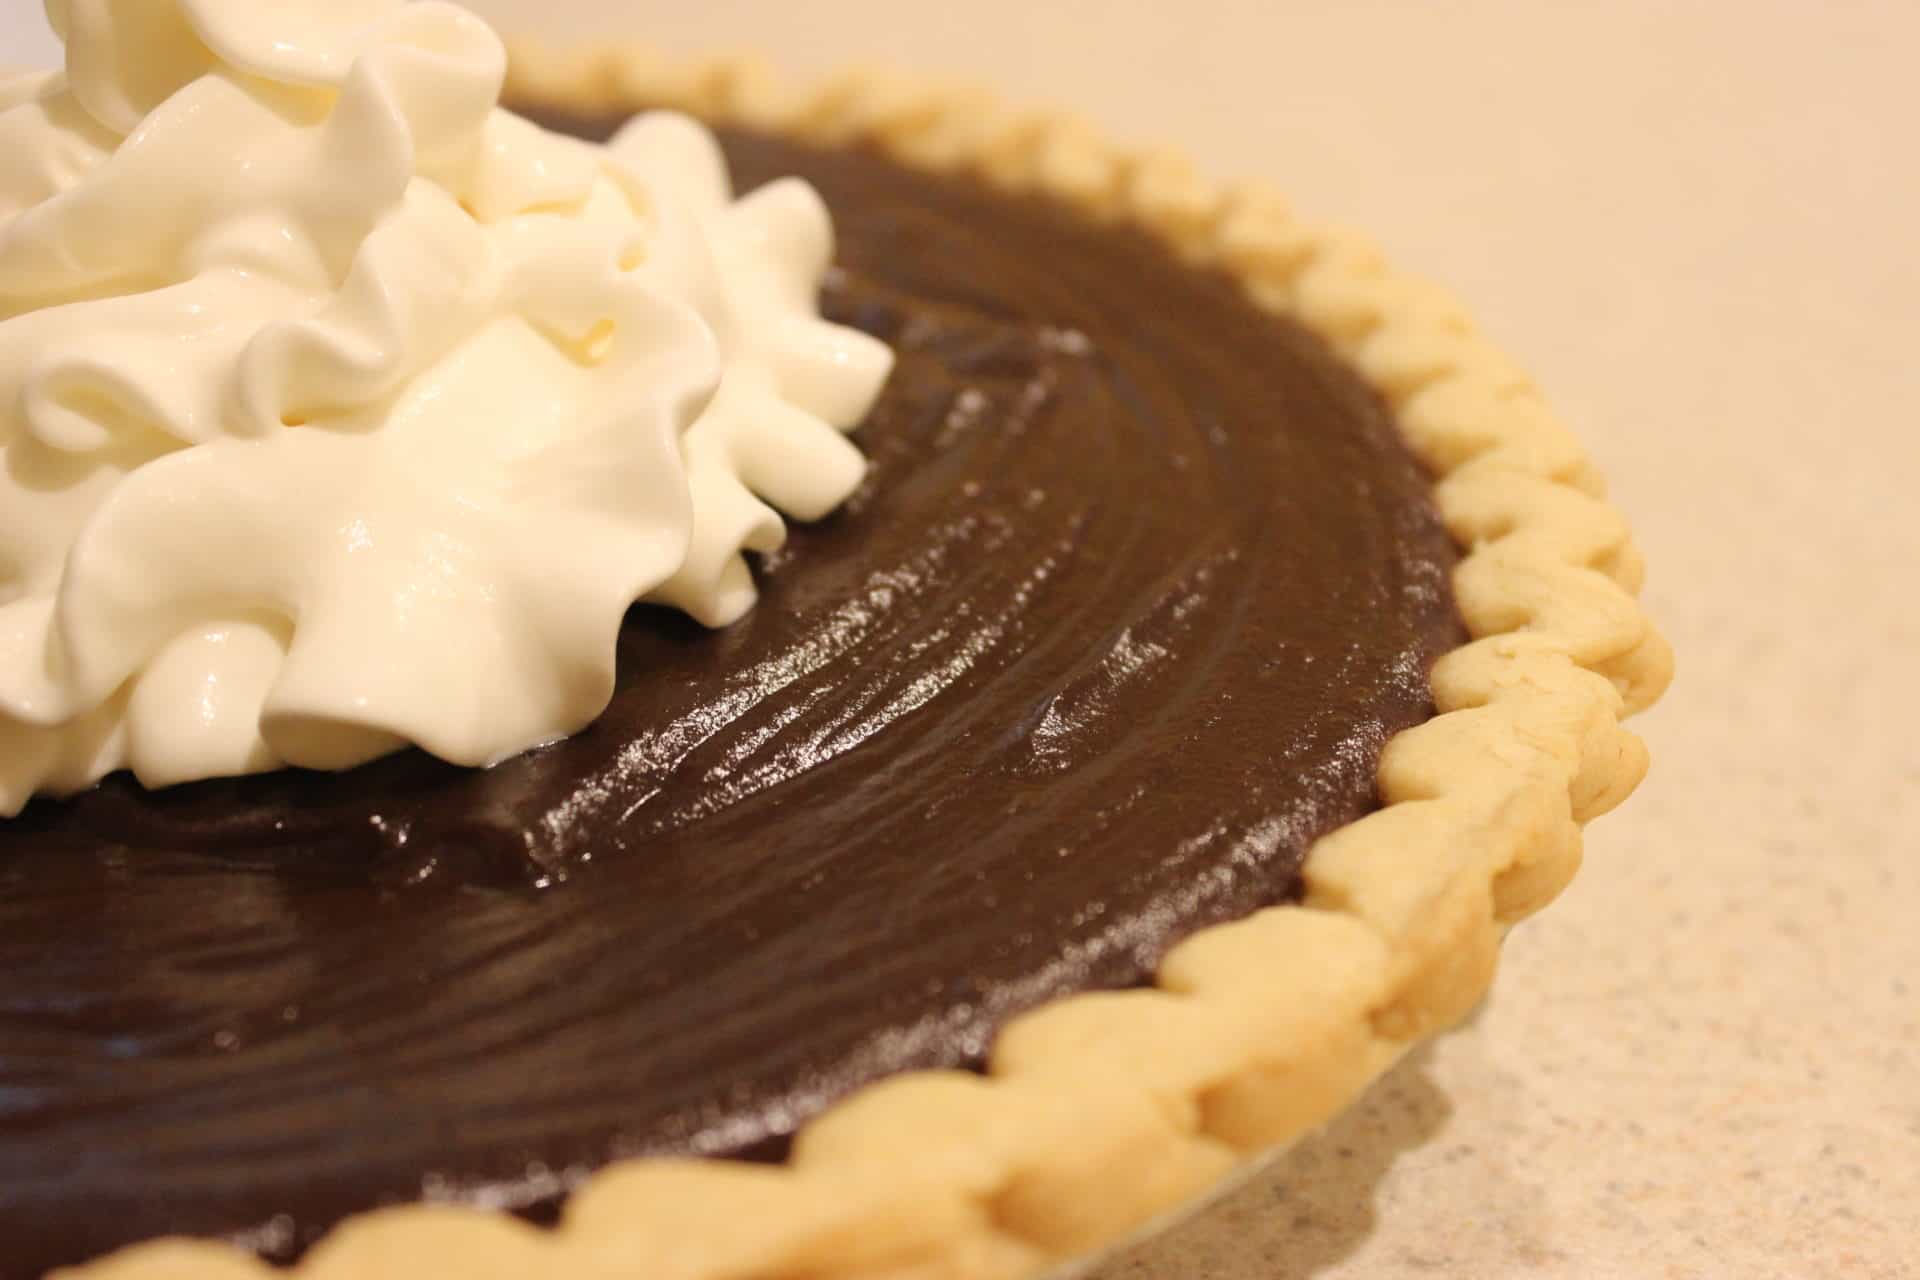 Up close shot of a chocolate pie with whipped cream.